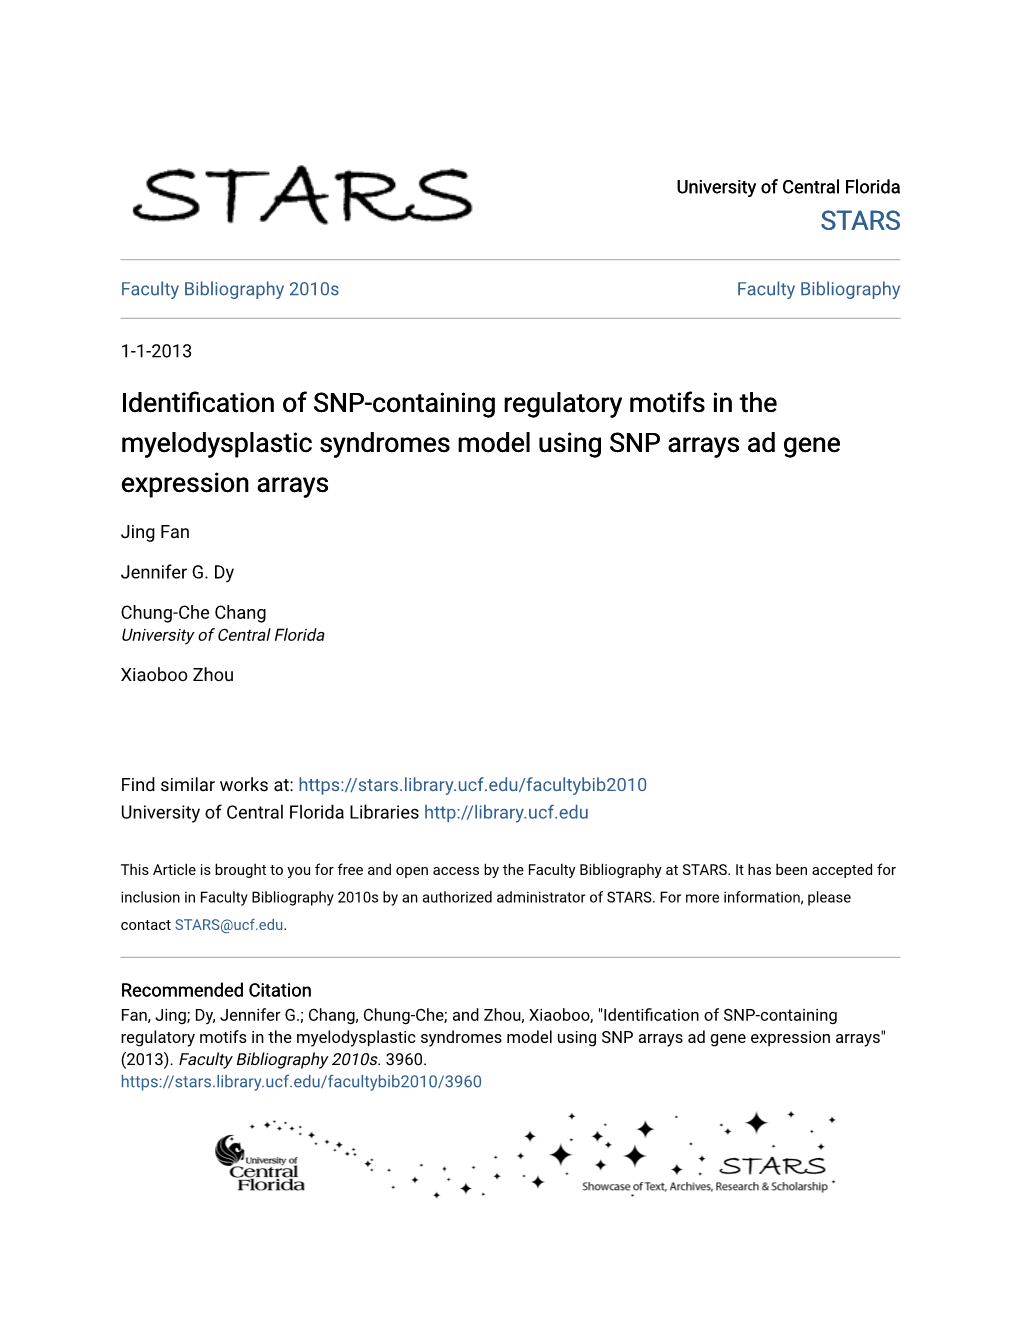 Identification of SNP-Containing Regulatory Motifs in the Myelodysplastic Syndromes Model Using SNP Arrays Ad Gene Expression Arrays" (2013)